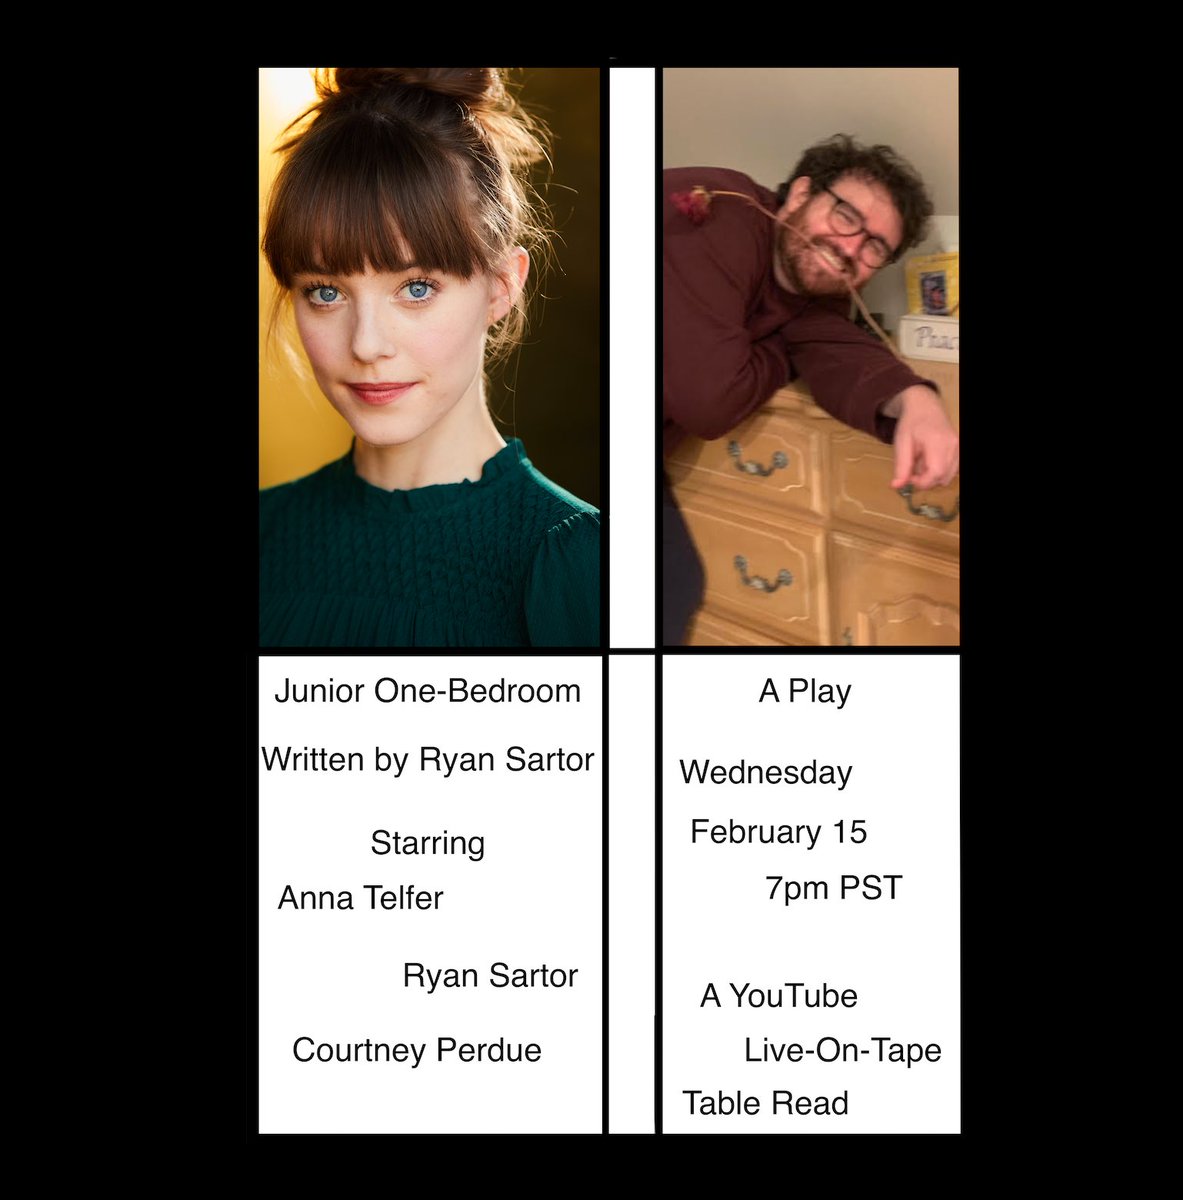 Back with a YouTube Live(-on-Tape) Table Read, Wednesday February 15 at 7pm PST! A full-length play! Starring Anna Telfer! @CourtneyPerdue1 reading screen directions! I act in it too! Tune in!